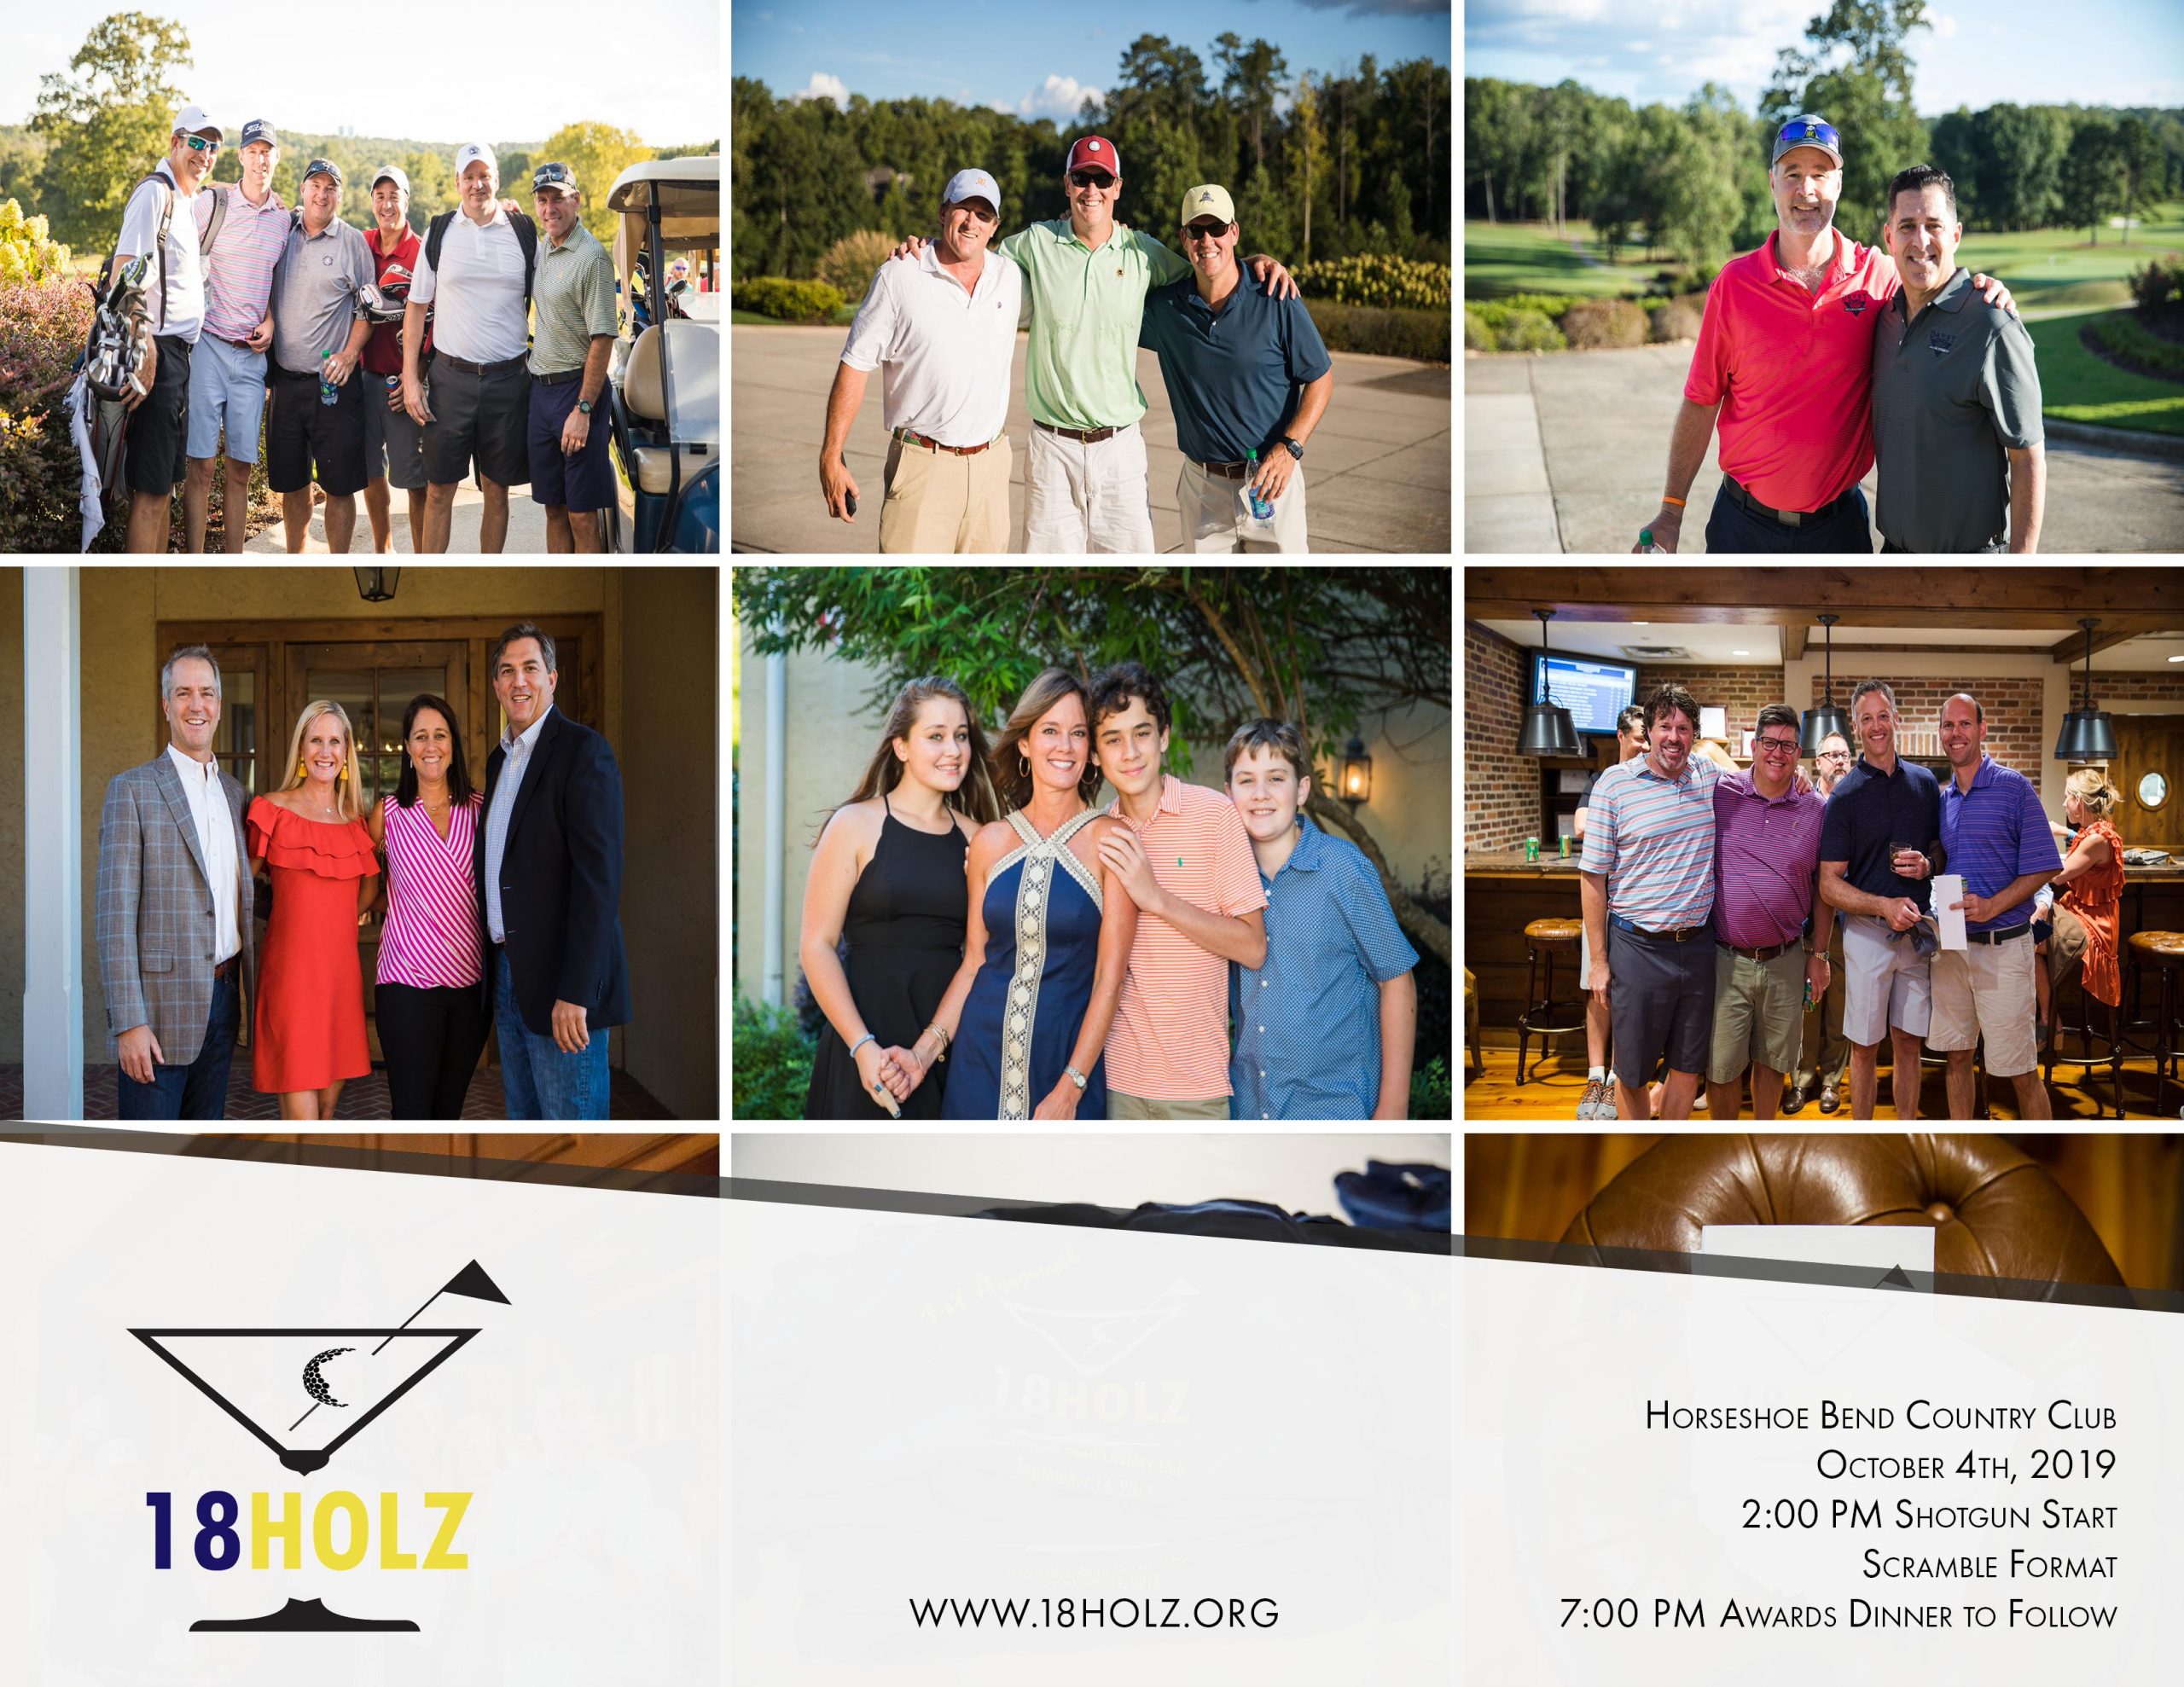 3rd Annual 18 Holz Golf Classic - Eric M. Holzworth Memorial Foundation